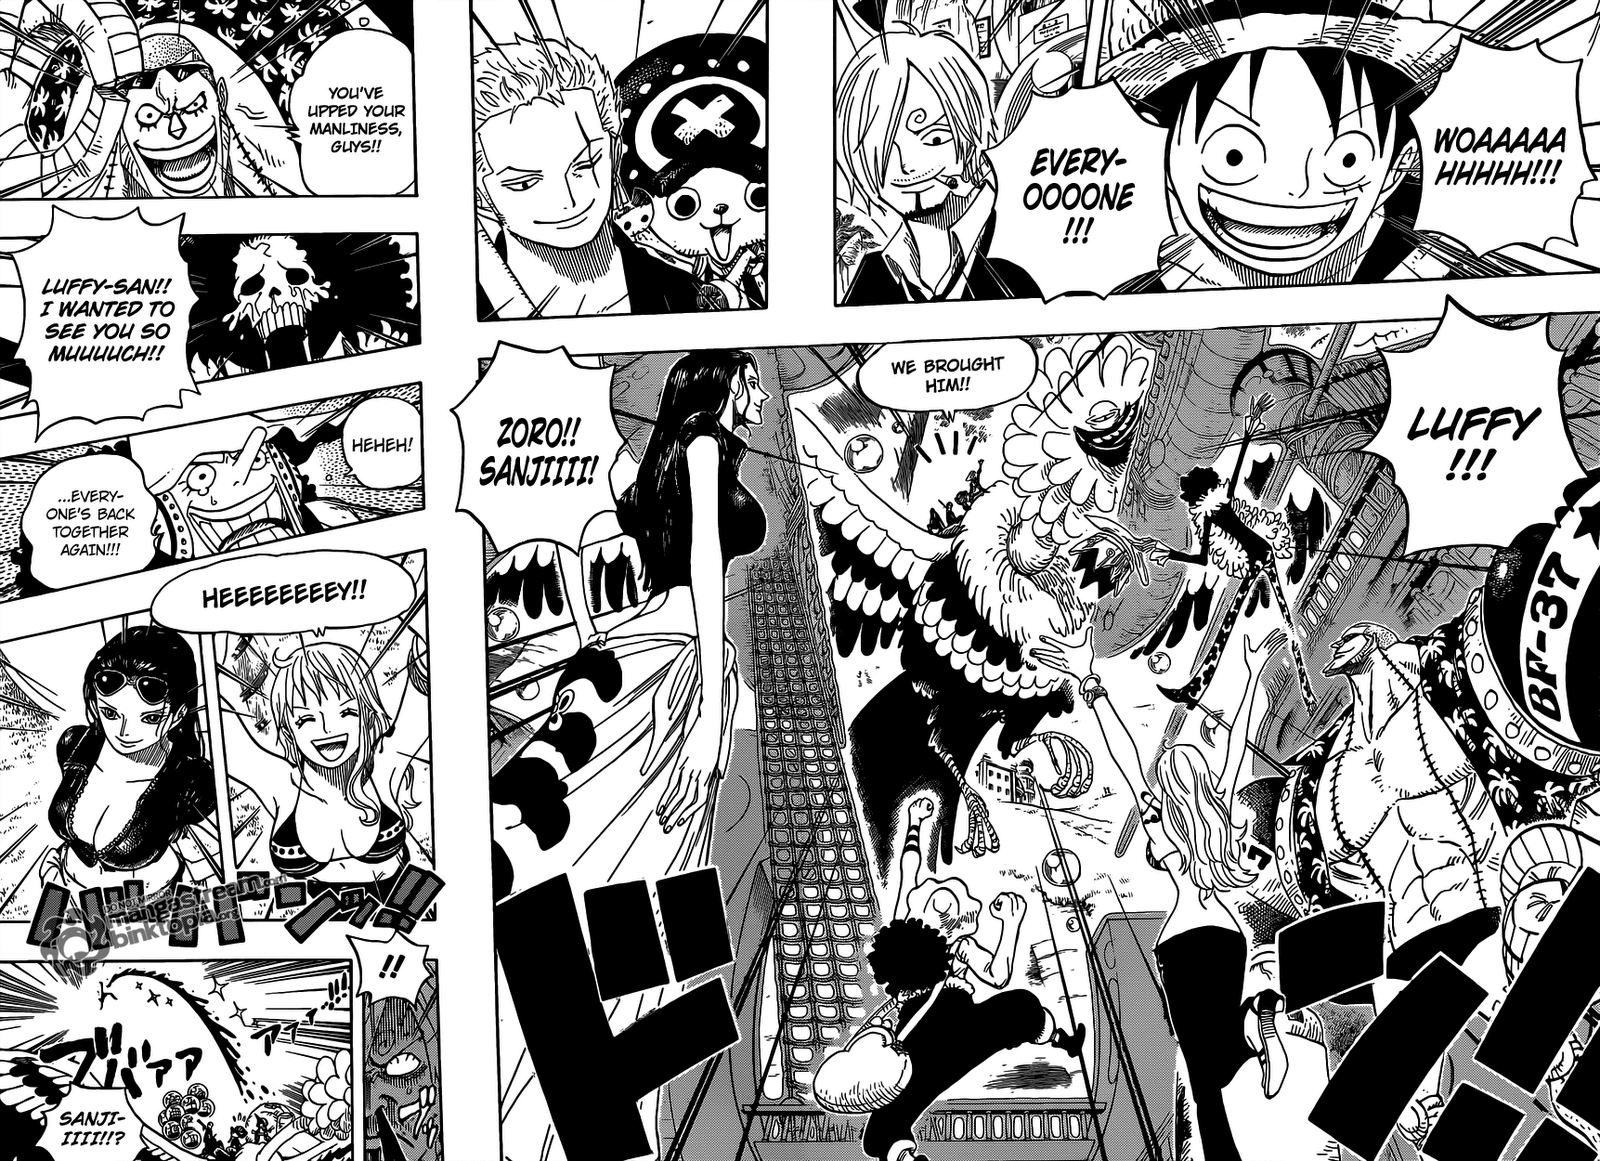 Read One Piece 602 Online | 05 - Press F5 to reload this image